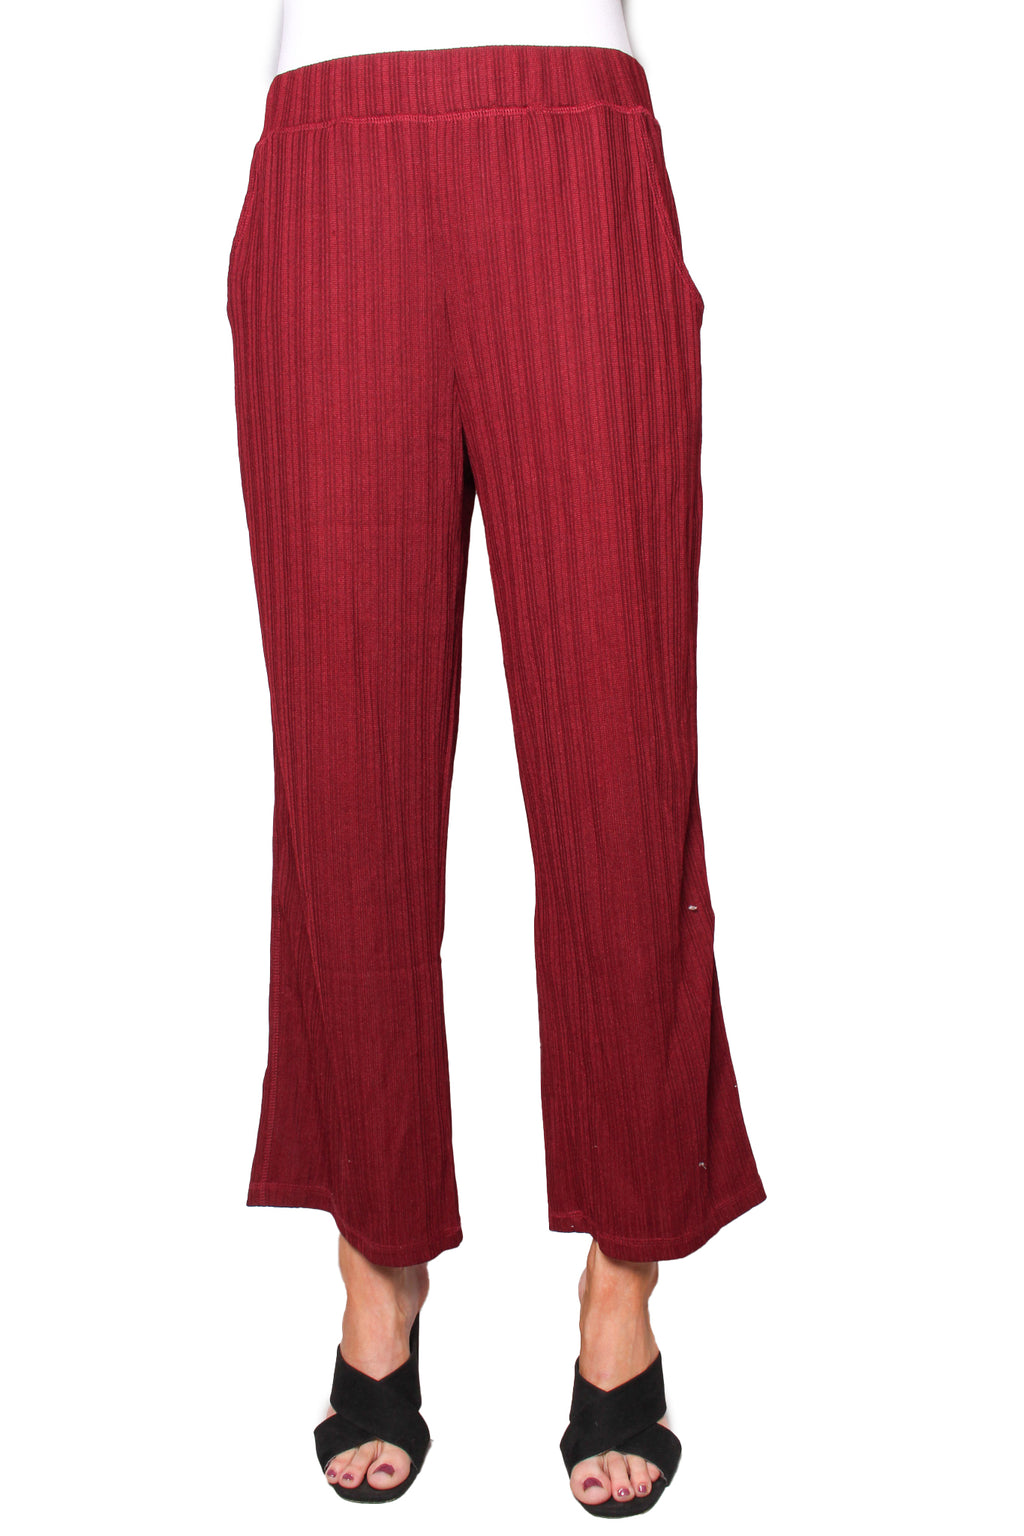 Women's Waisted Solid Knitted Pants